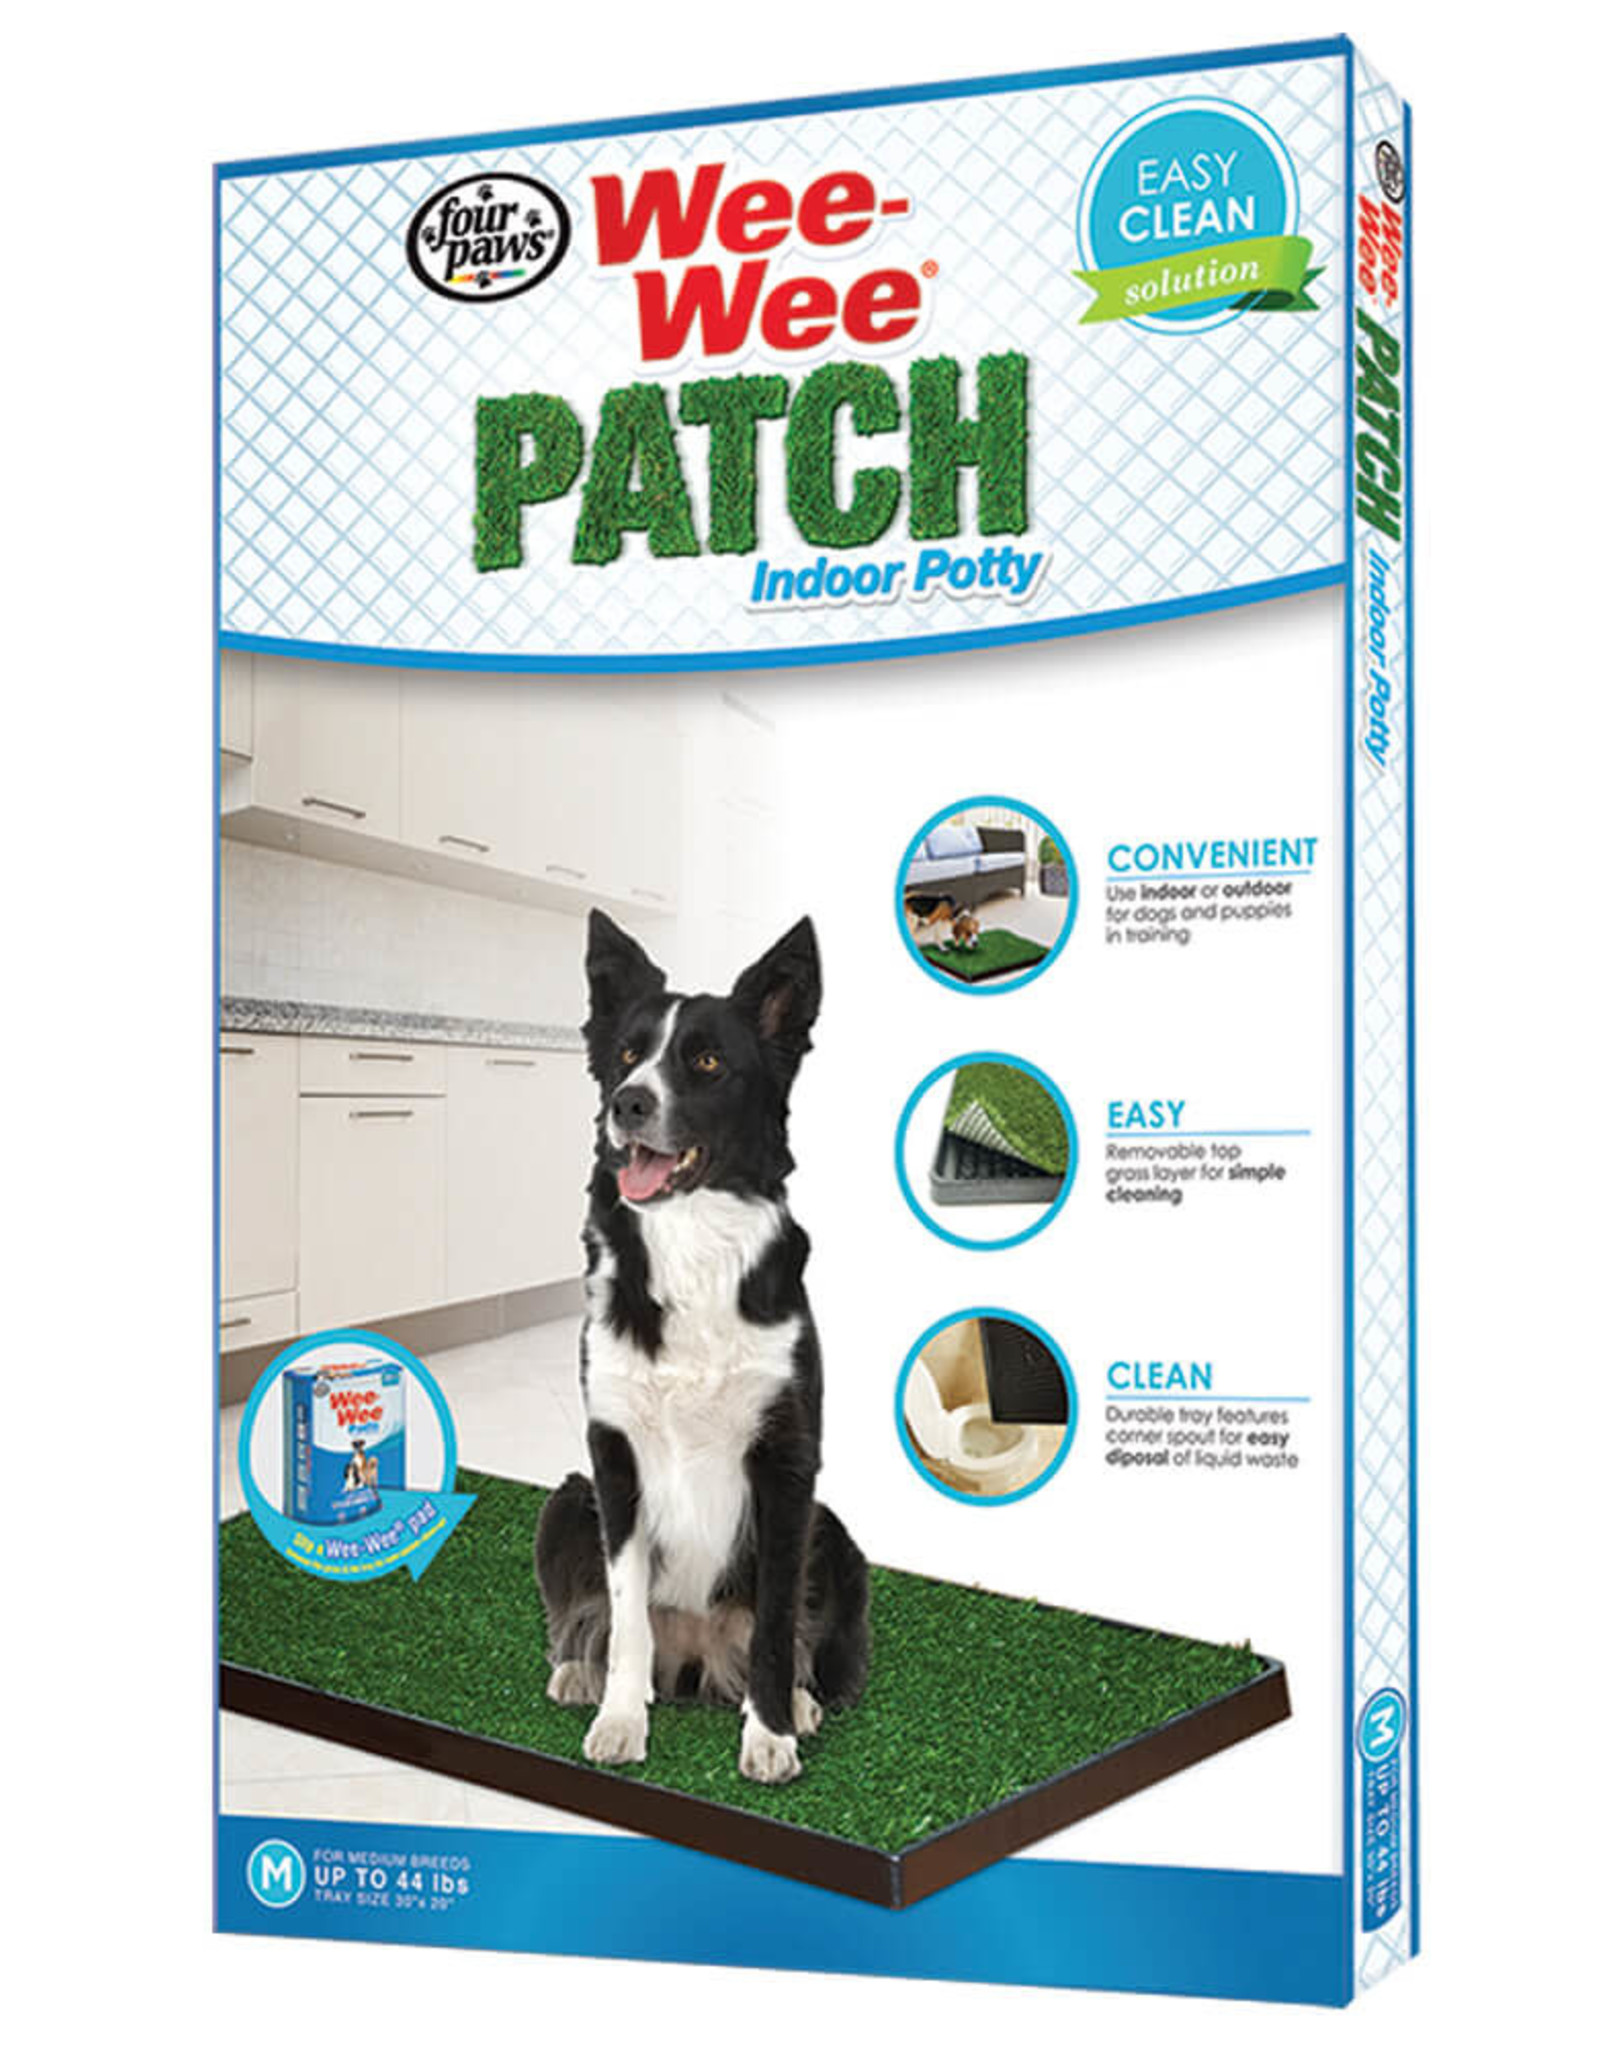 FOUR PAWS PRODUCTS Wee-Wee® Patch Indoor Potty